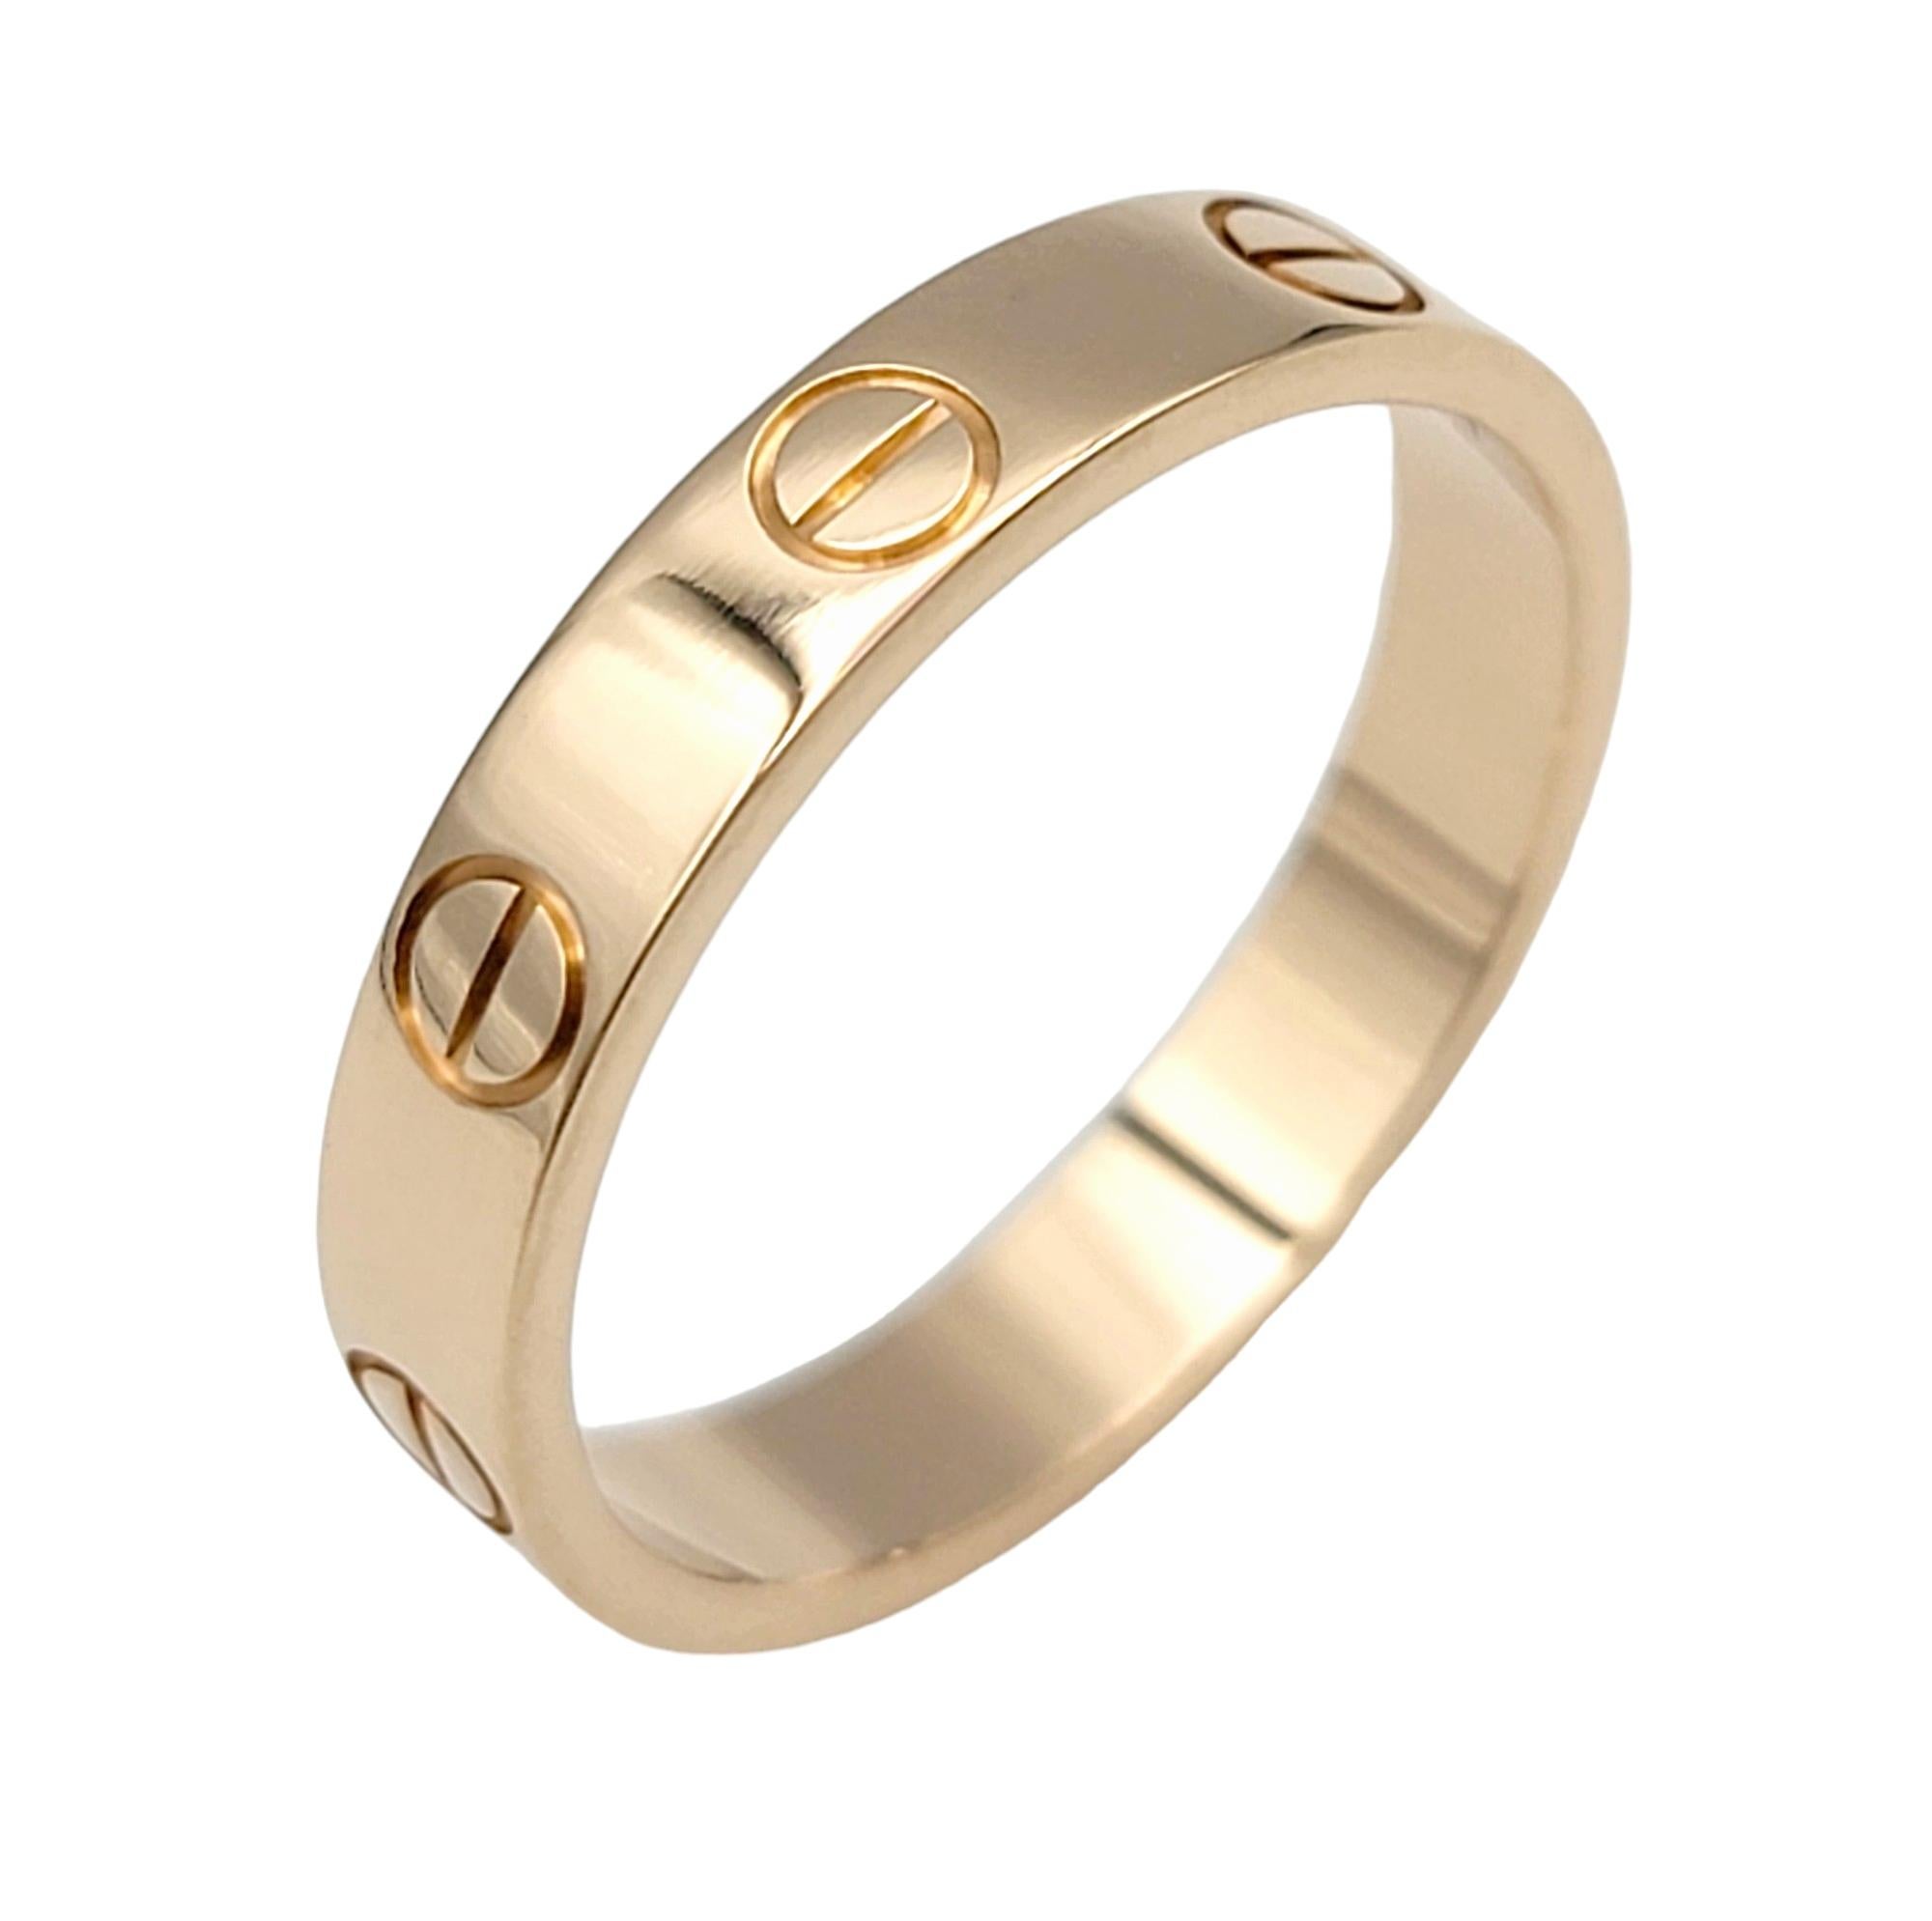 Ring Size: 6.5 (US), 53 (EU)

This gorgeous Cartier Love ring in 18 karat rose gold is an iconic and timeless piece that epitomizes both elegance and romance. Crafted by the renowned luxury brand Cartier, this ring is a part of the Love collection,